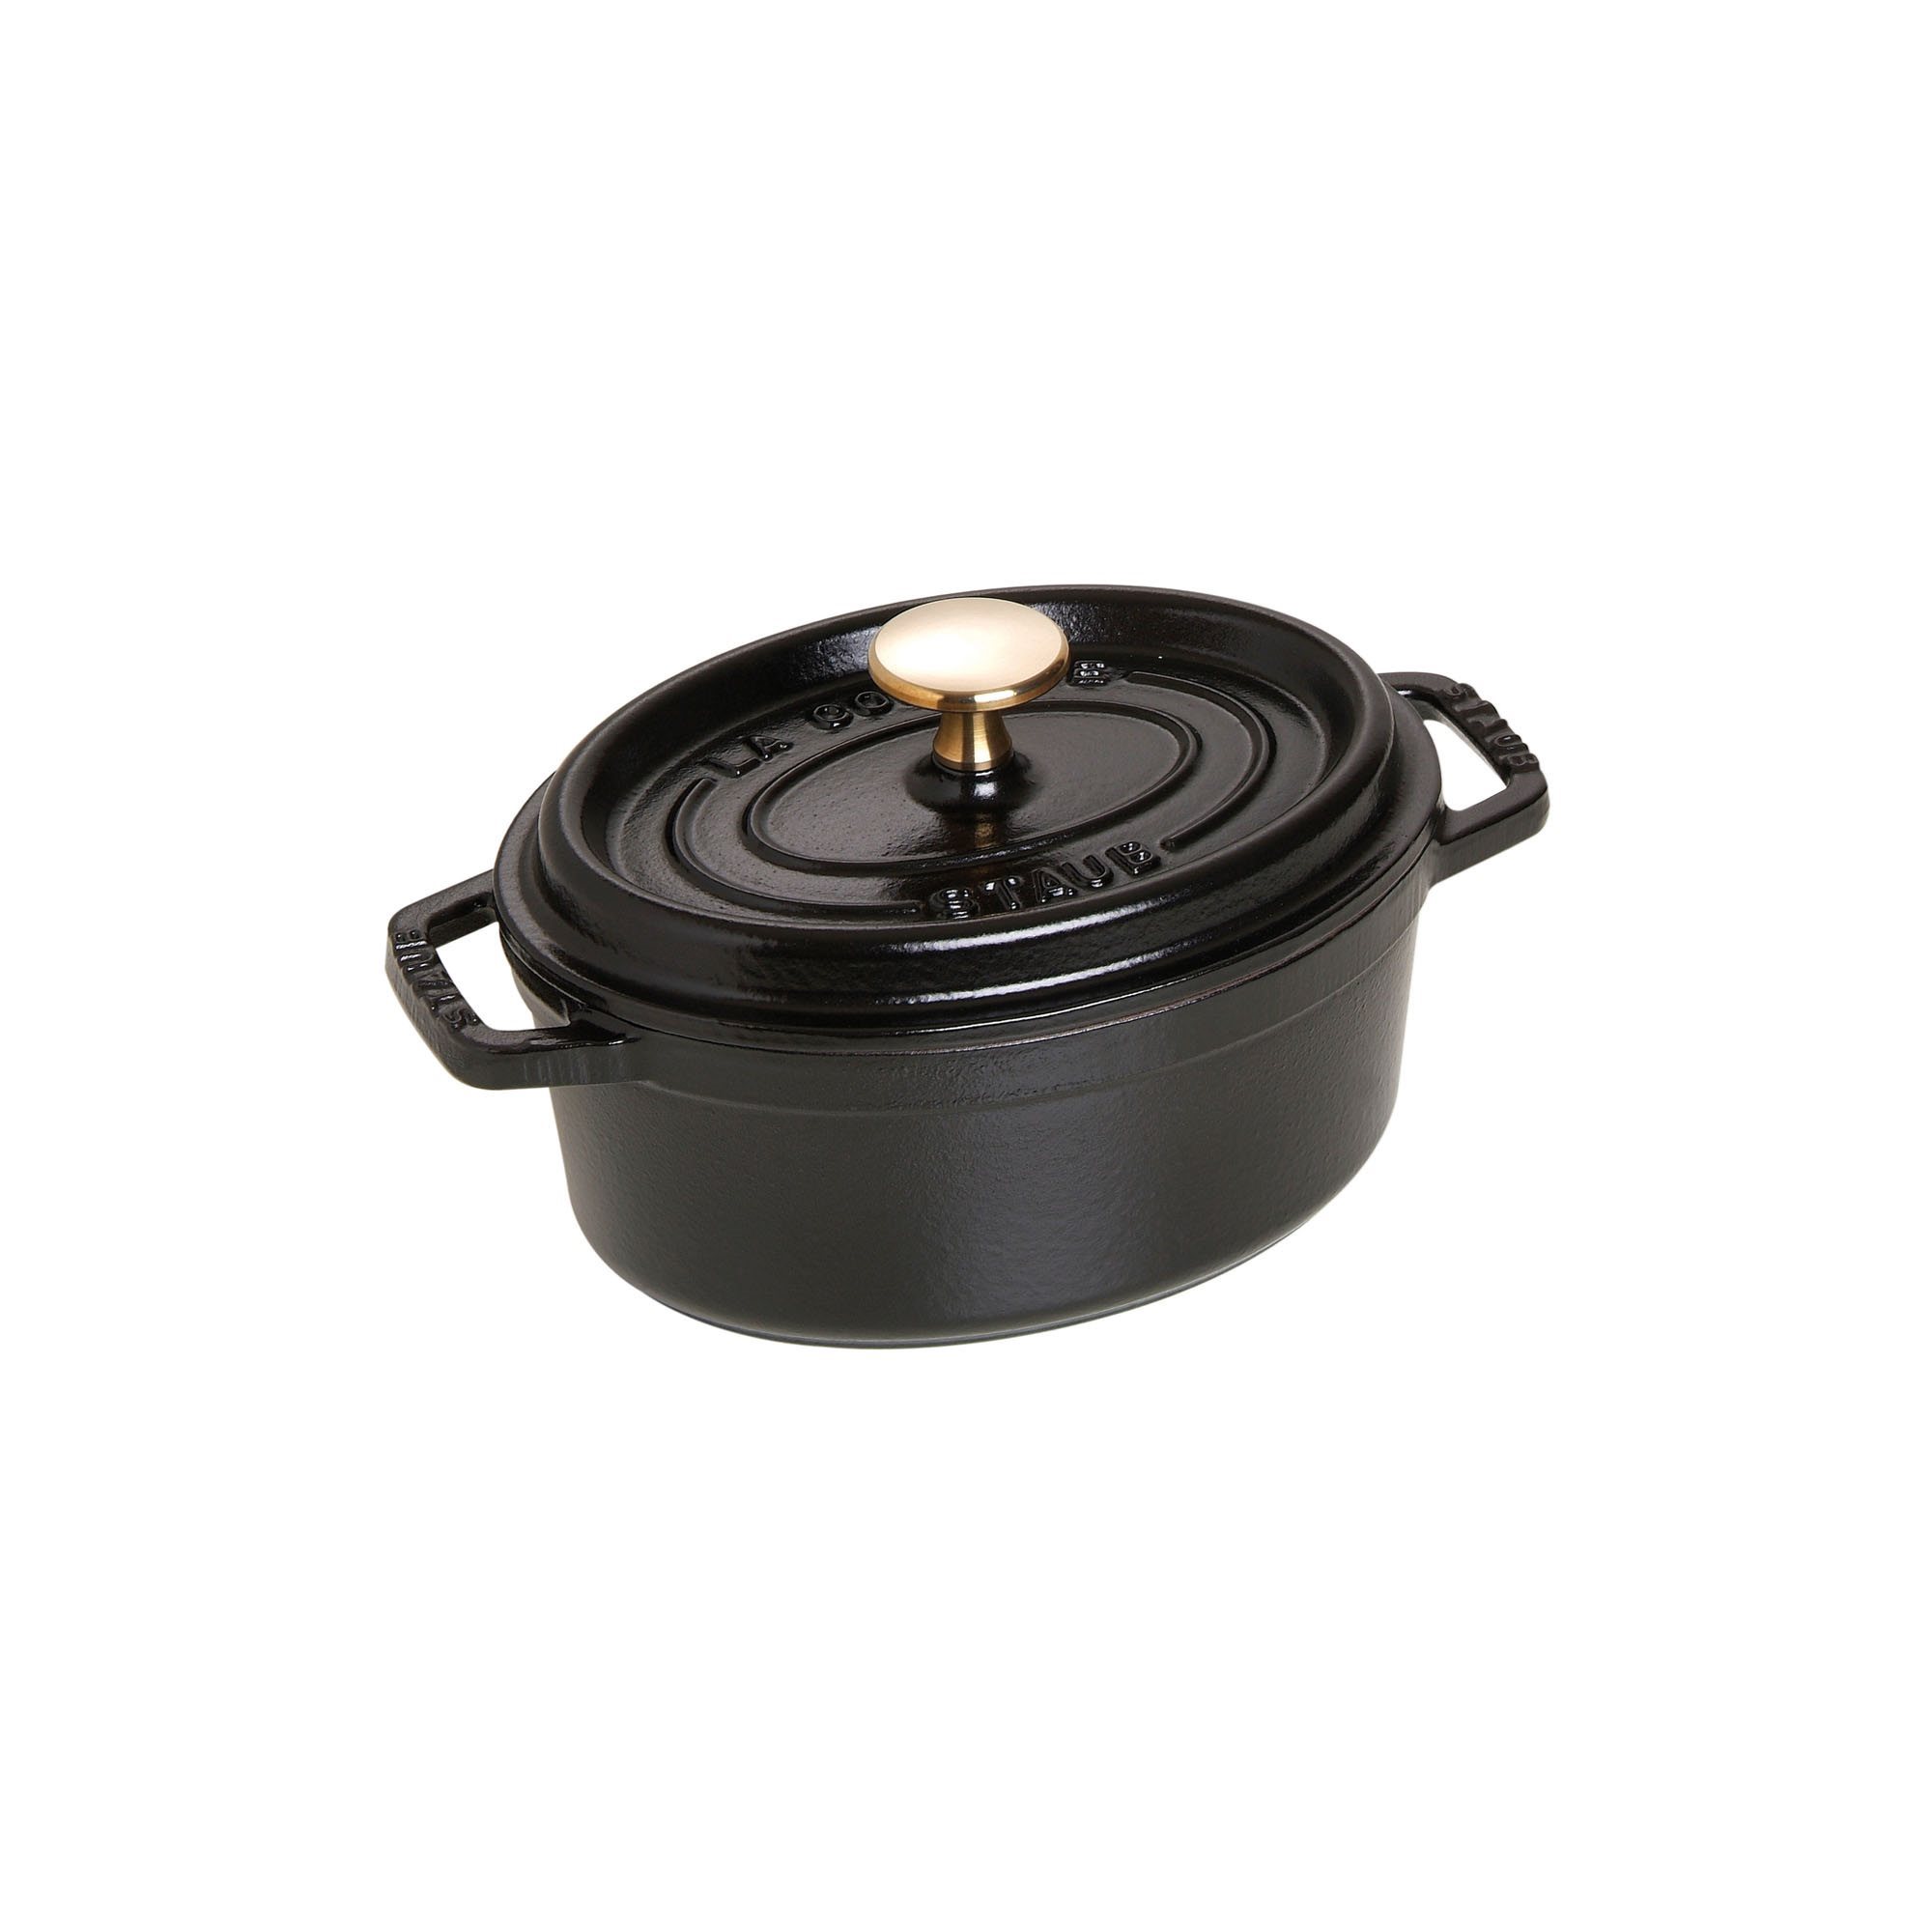 Buy Staub Cast Iron - Oval Cocottes Cocotte